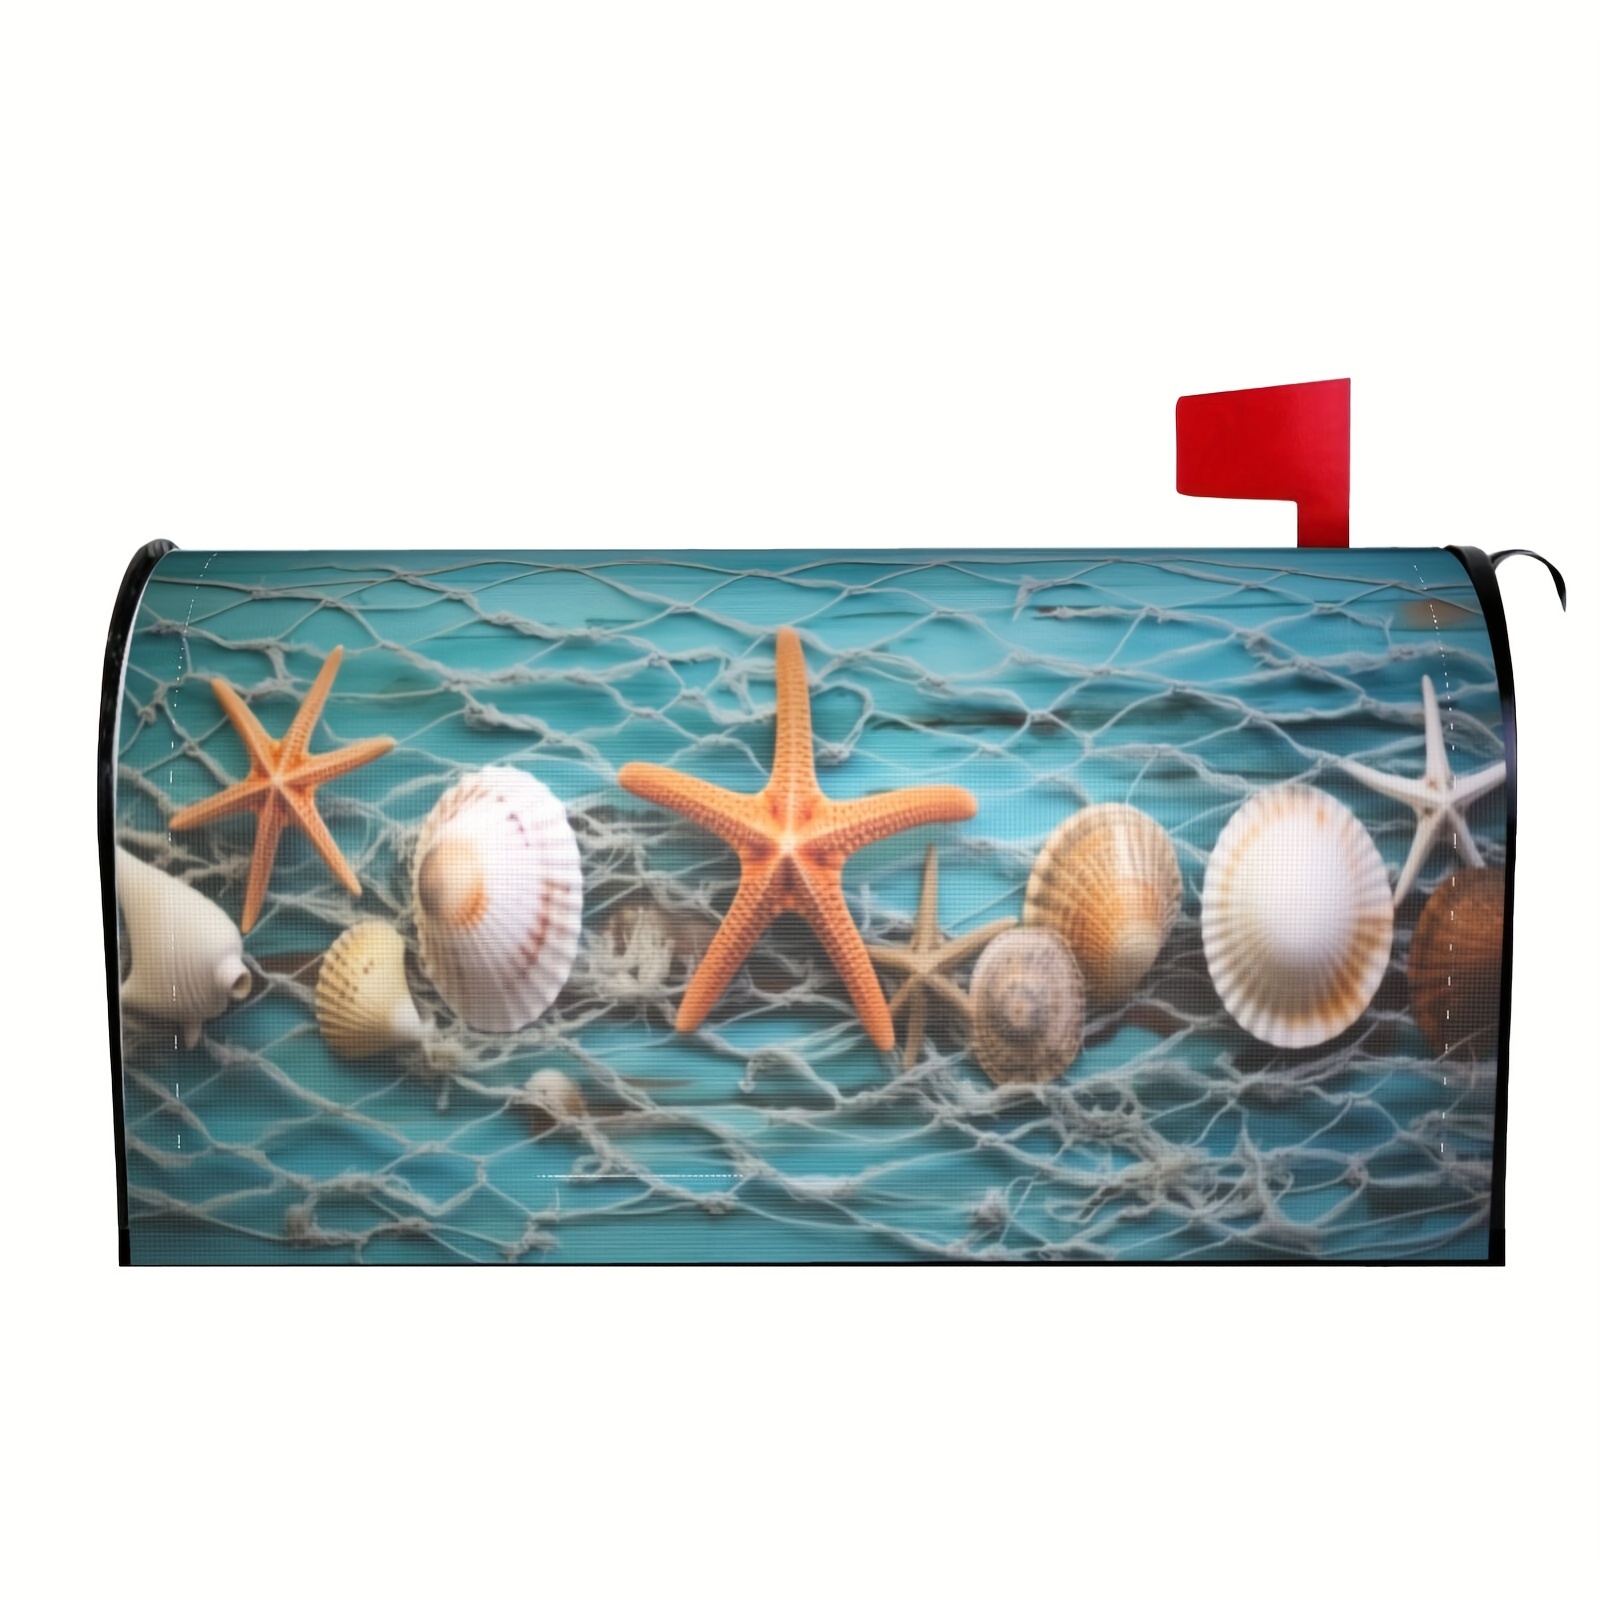 Decorative fishing net with shells and Star fish